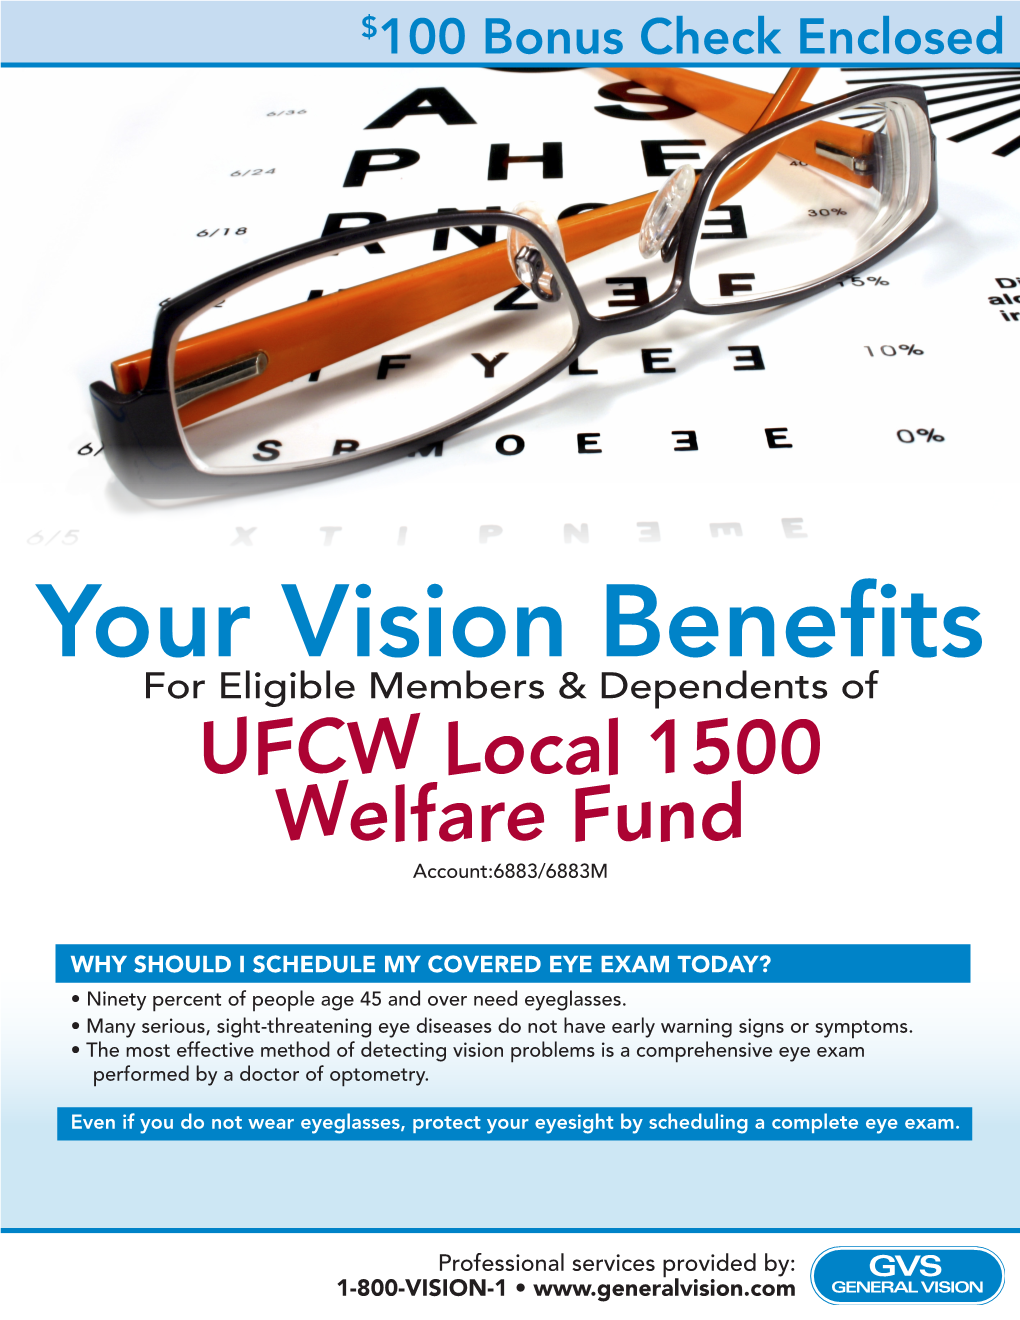 Your Vision Benefits for Eligible Members & Dependents of UFCW Local 1500 Welfare Fund Account:6883/6883M